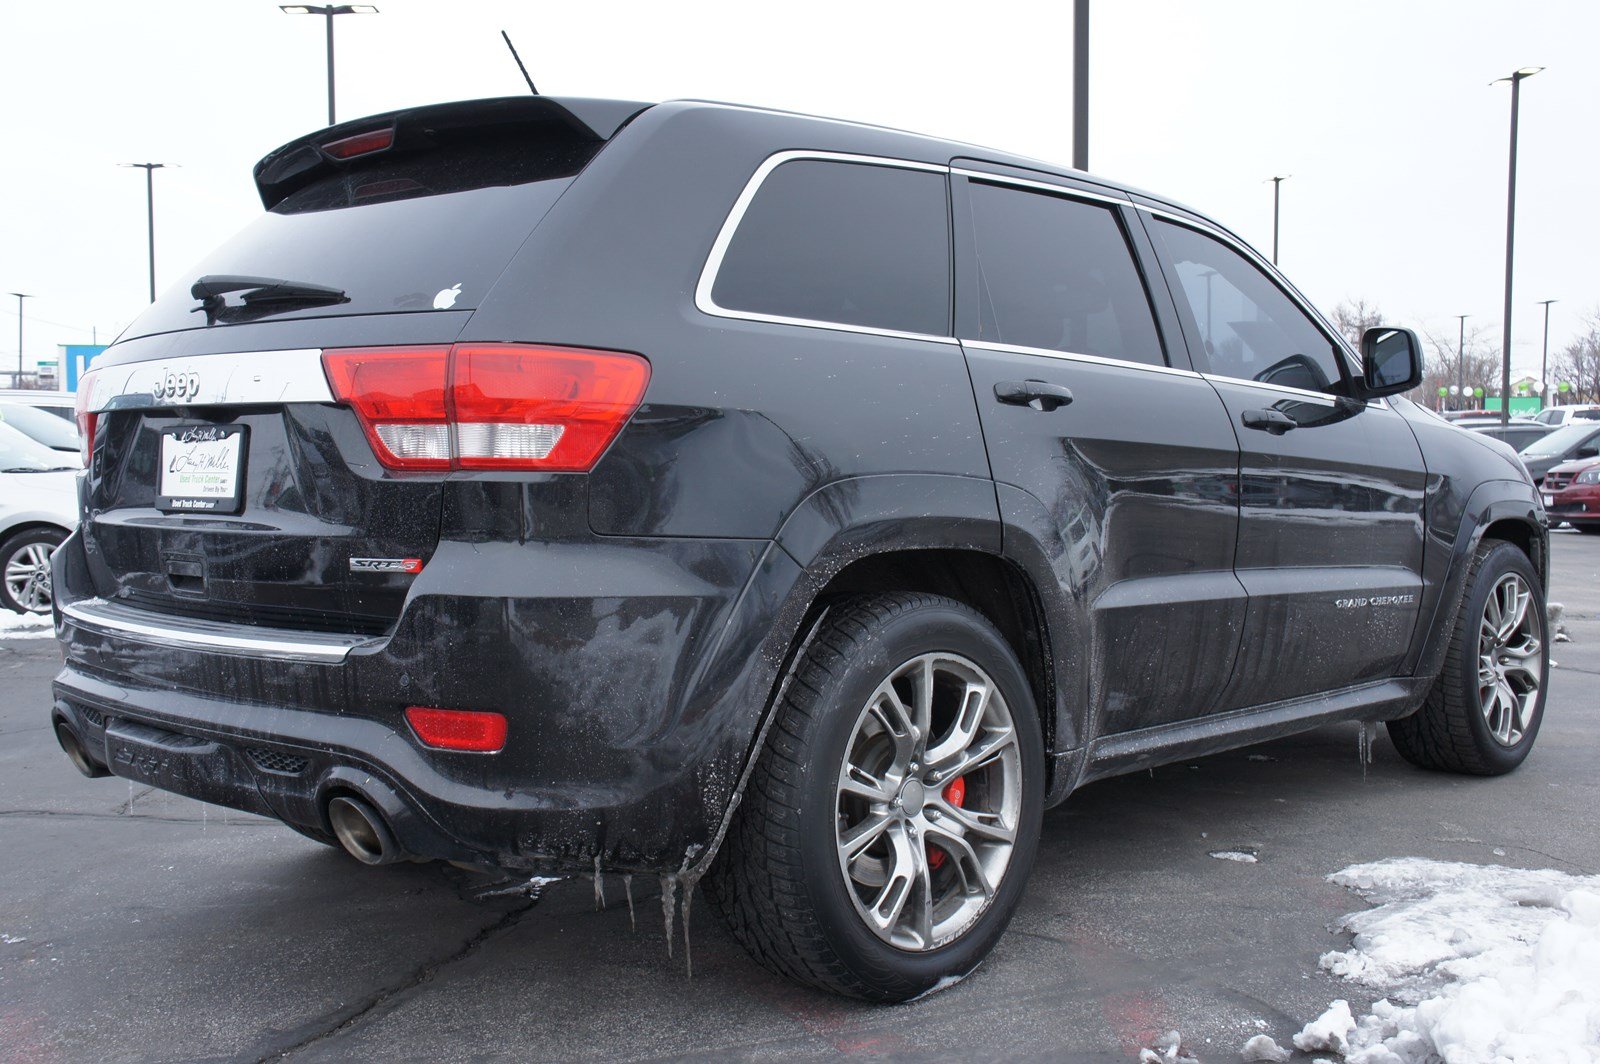 PreOwned 2012 Jeep Grand Cherokee SRT8 Sport Utility in